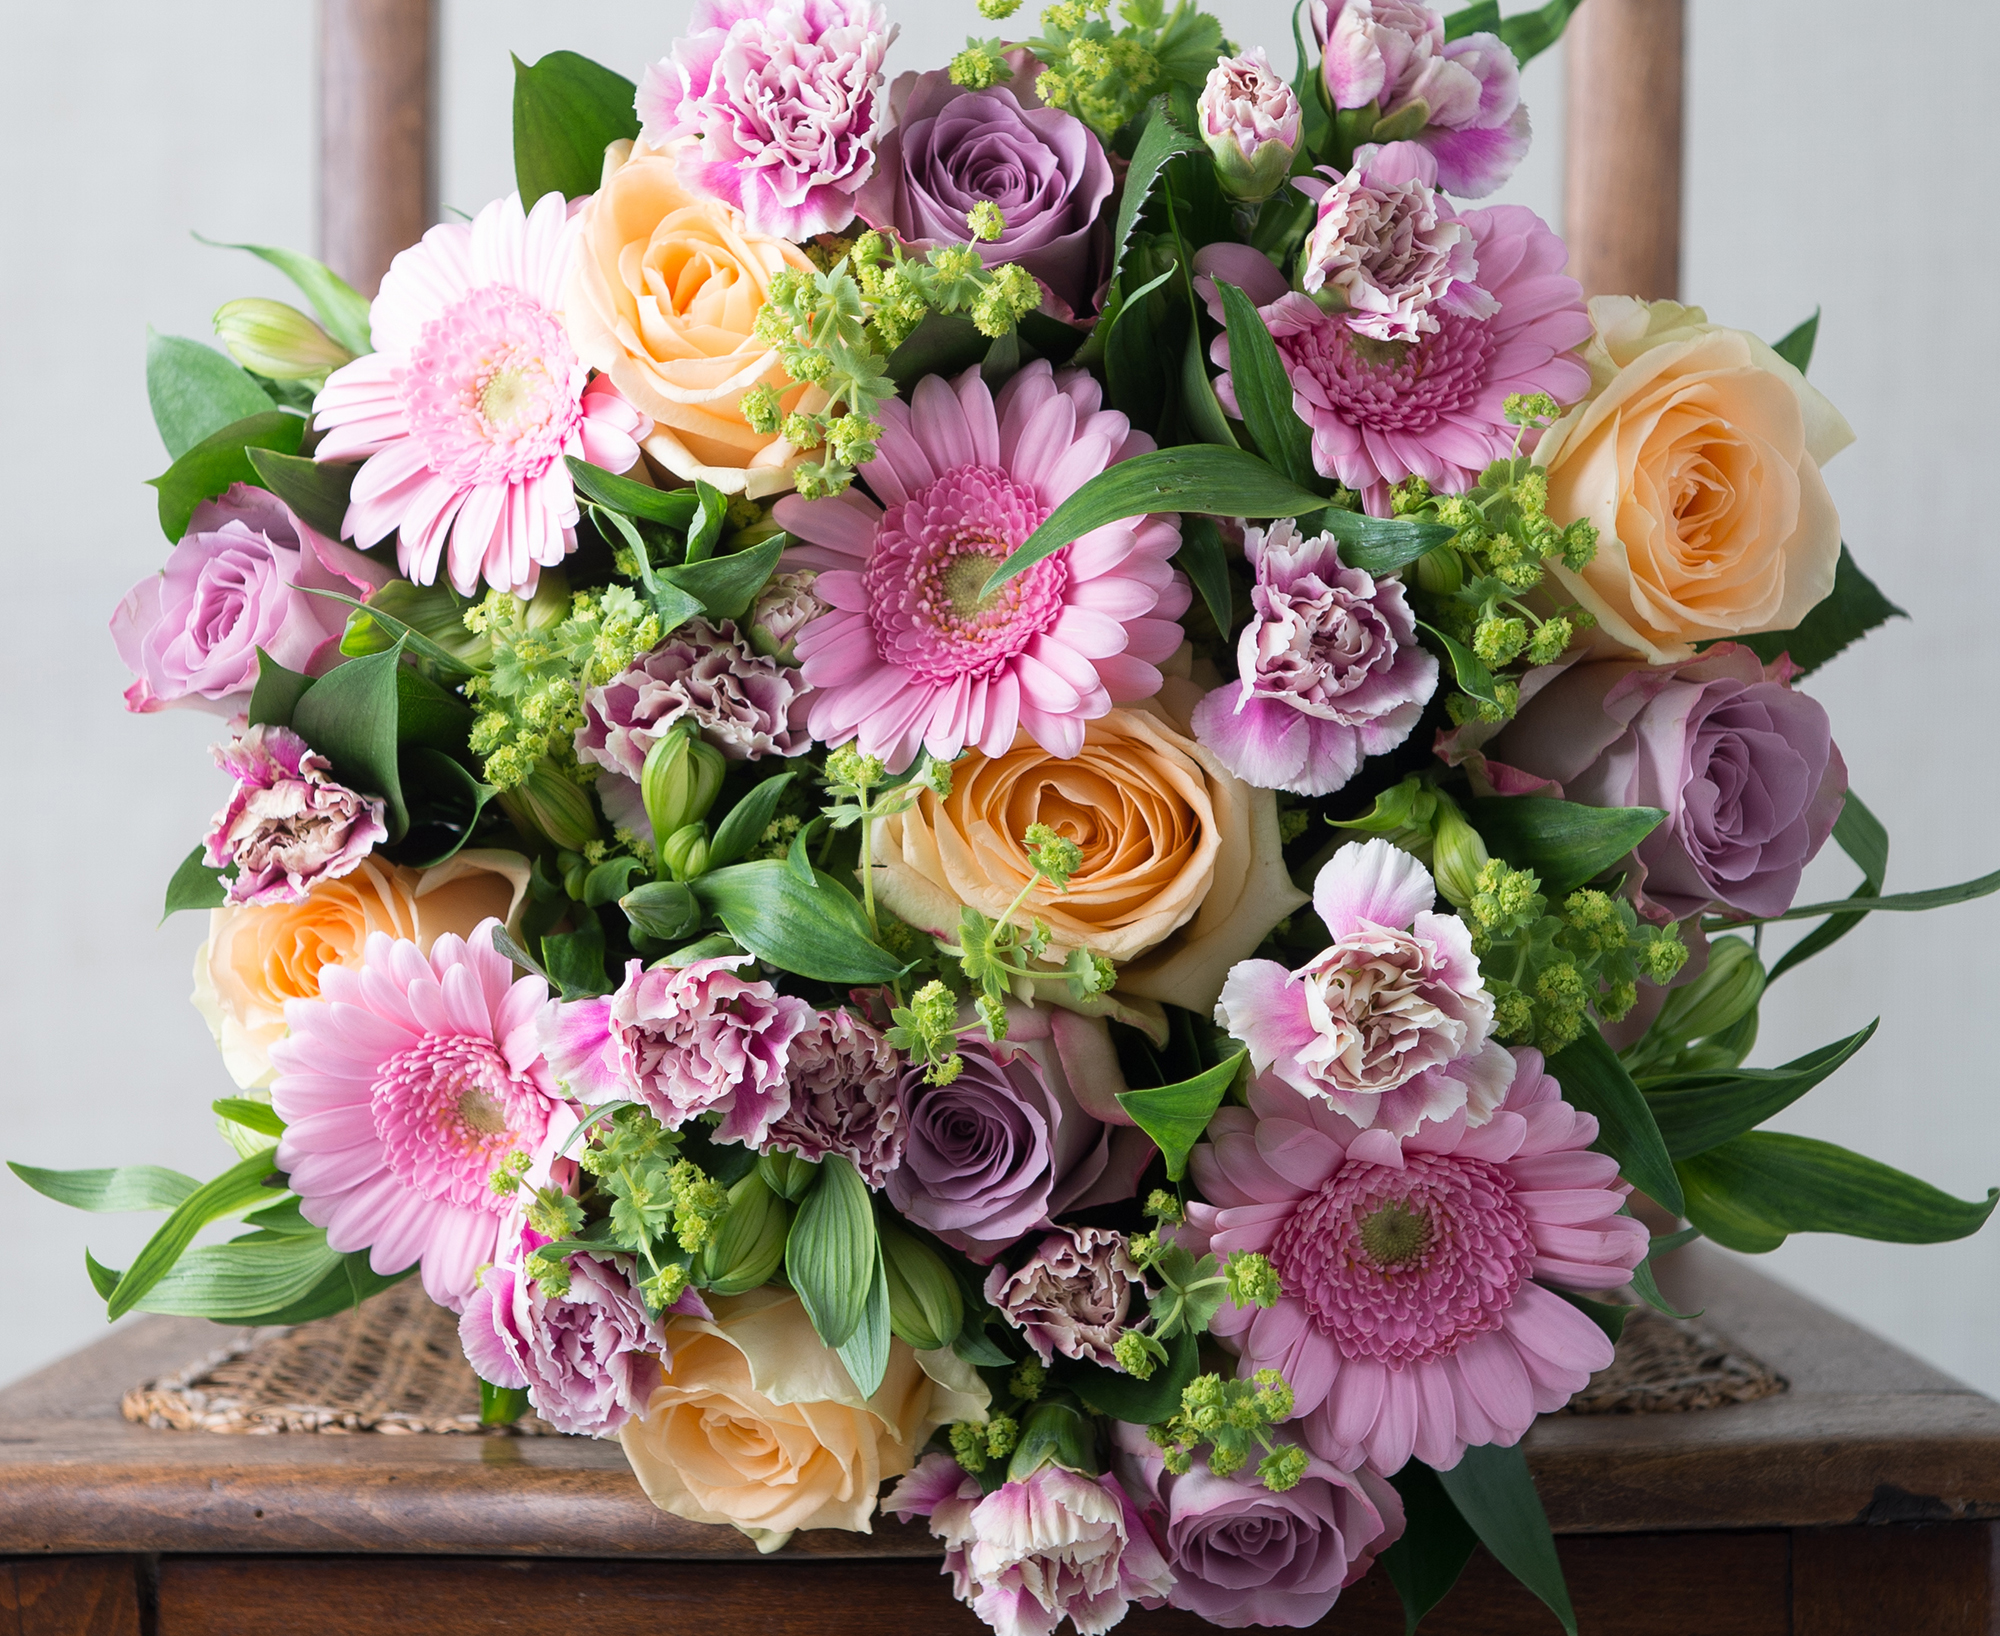 Win a £50 voucher for boutique flowers from Appleyard